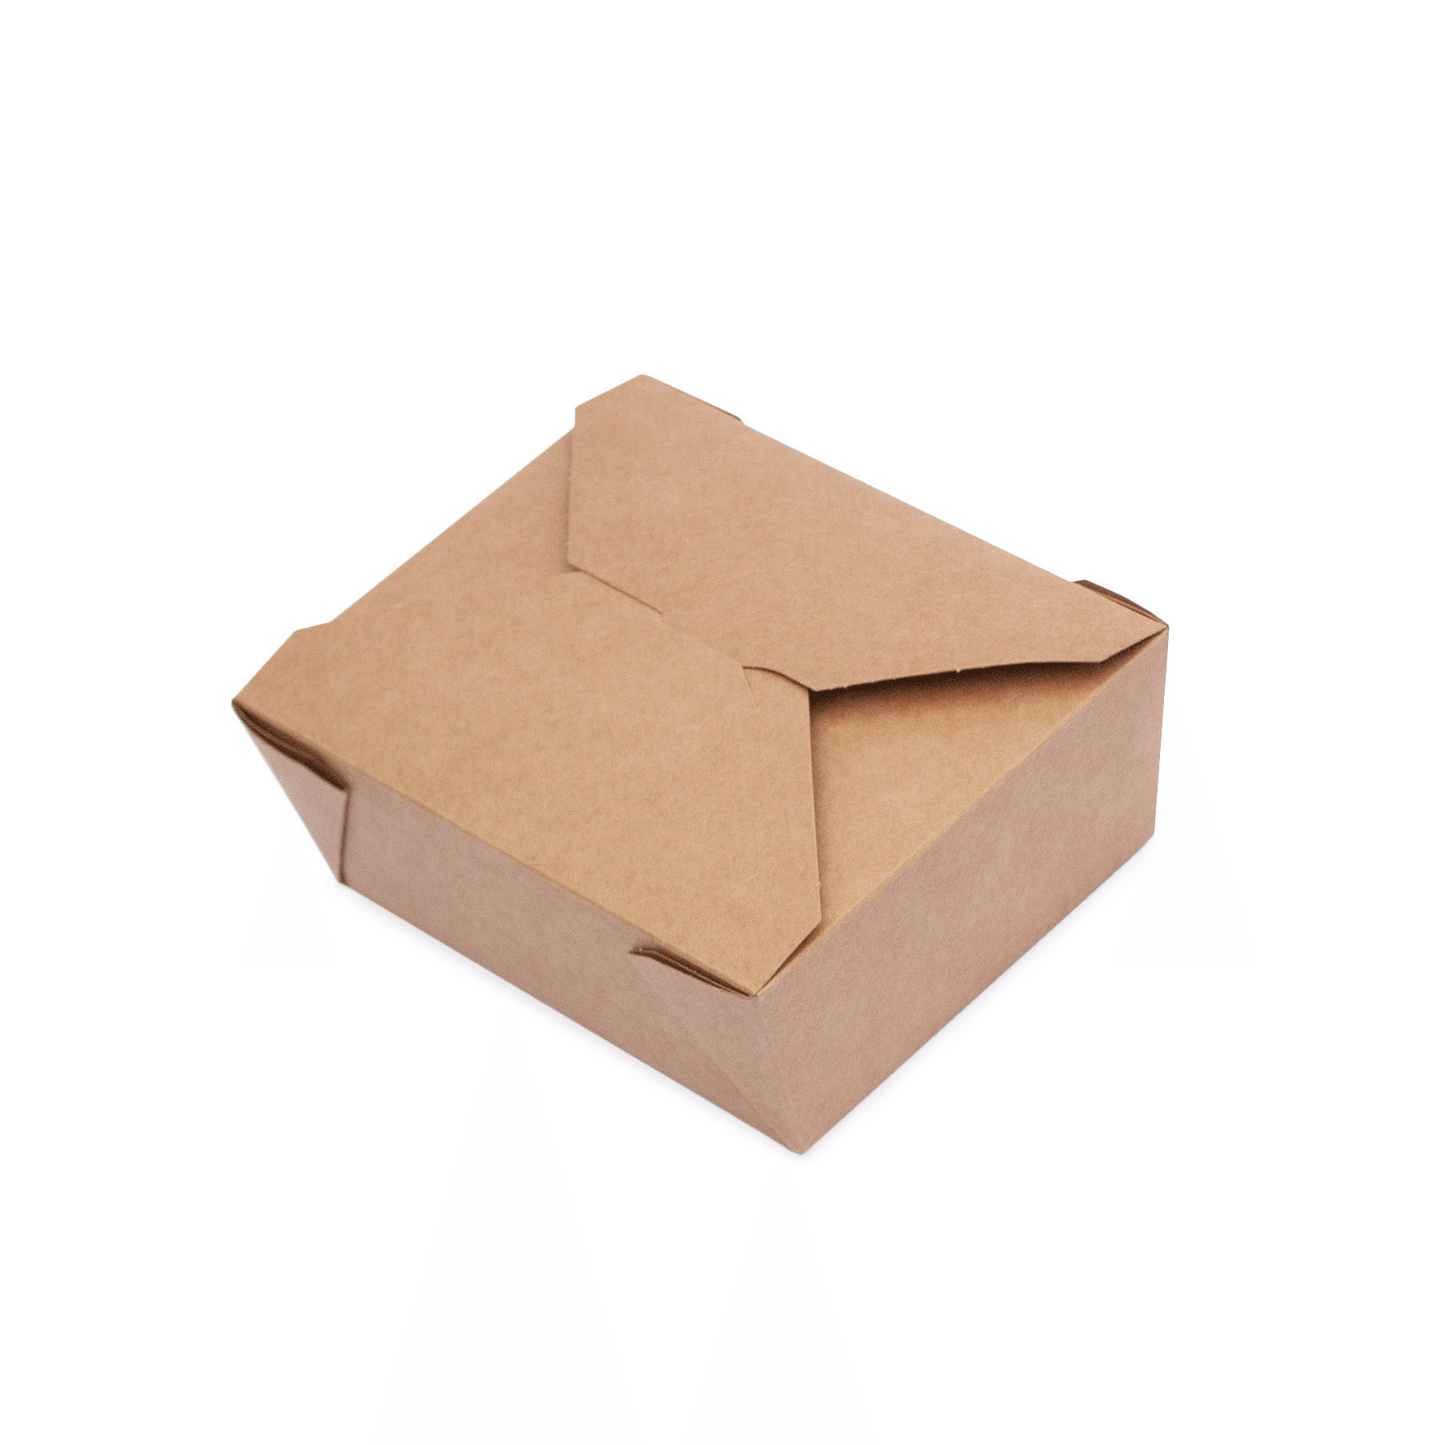 Leakproof food container No.3 kraft food-to-go carton 180 units, 1800ml (19.5 x 14 x 6.5cm)